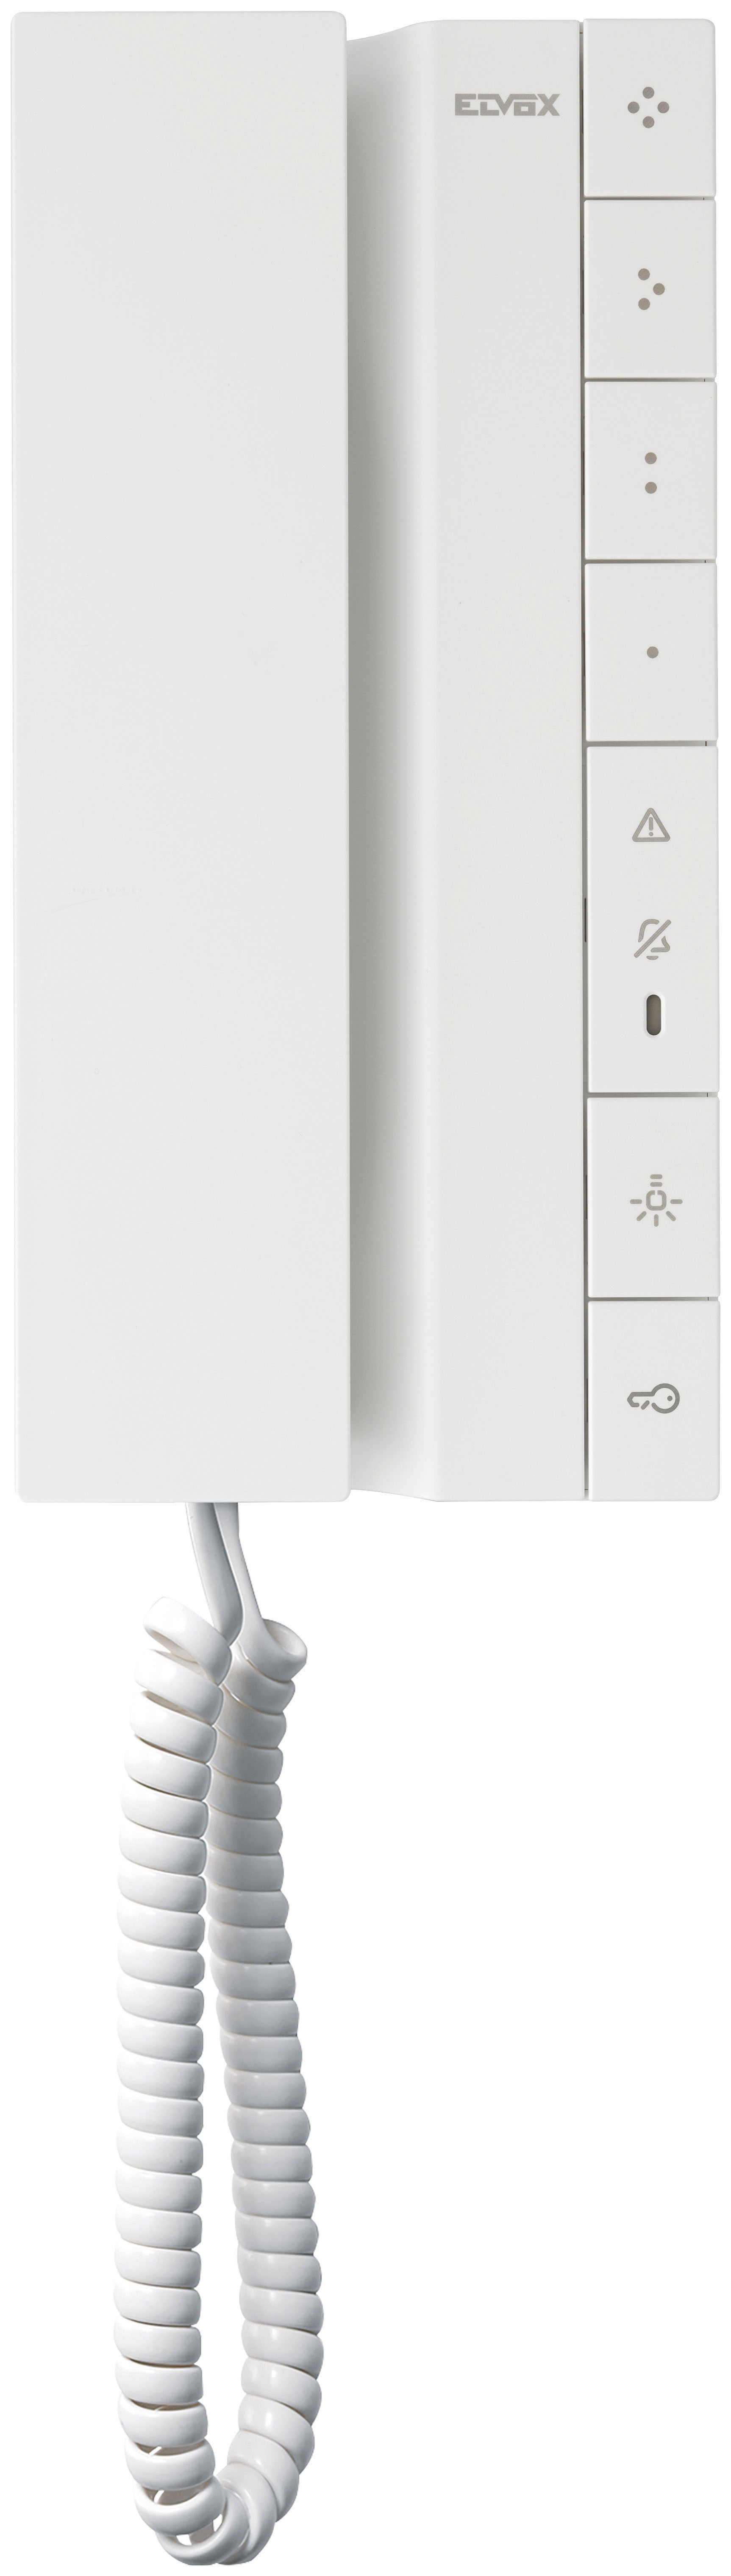 ELVOX VOXIE DUE FILI+ 2-WIRE INTERCOM HANDSET WITH 6 BUTTON WHITE APARTMENT/RESIDENTIAL MECHANICAL BUTTON PLASTIC POWER BY BUS CONTROLLER